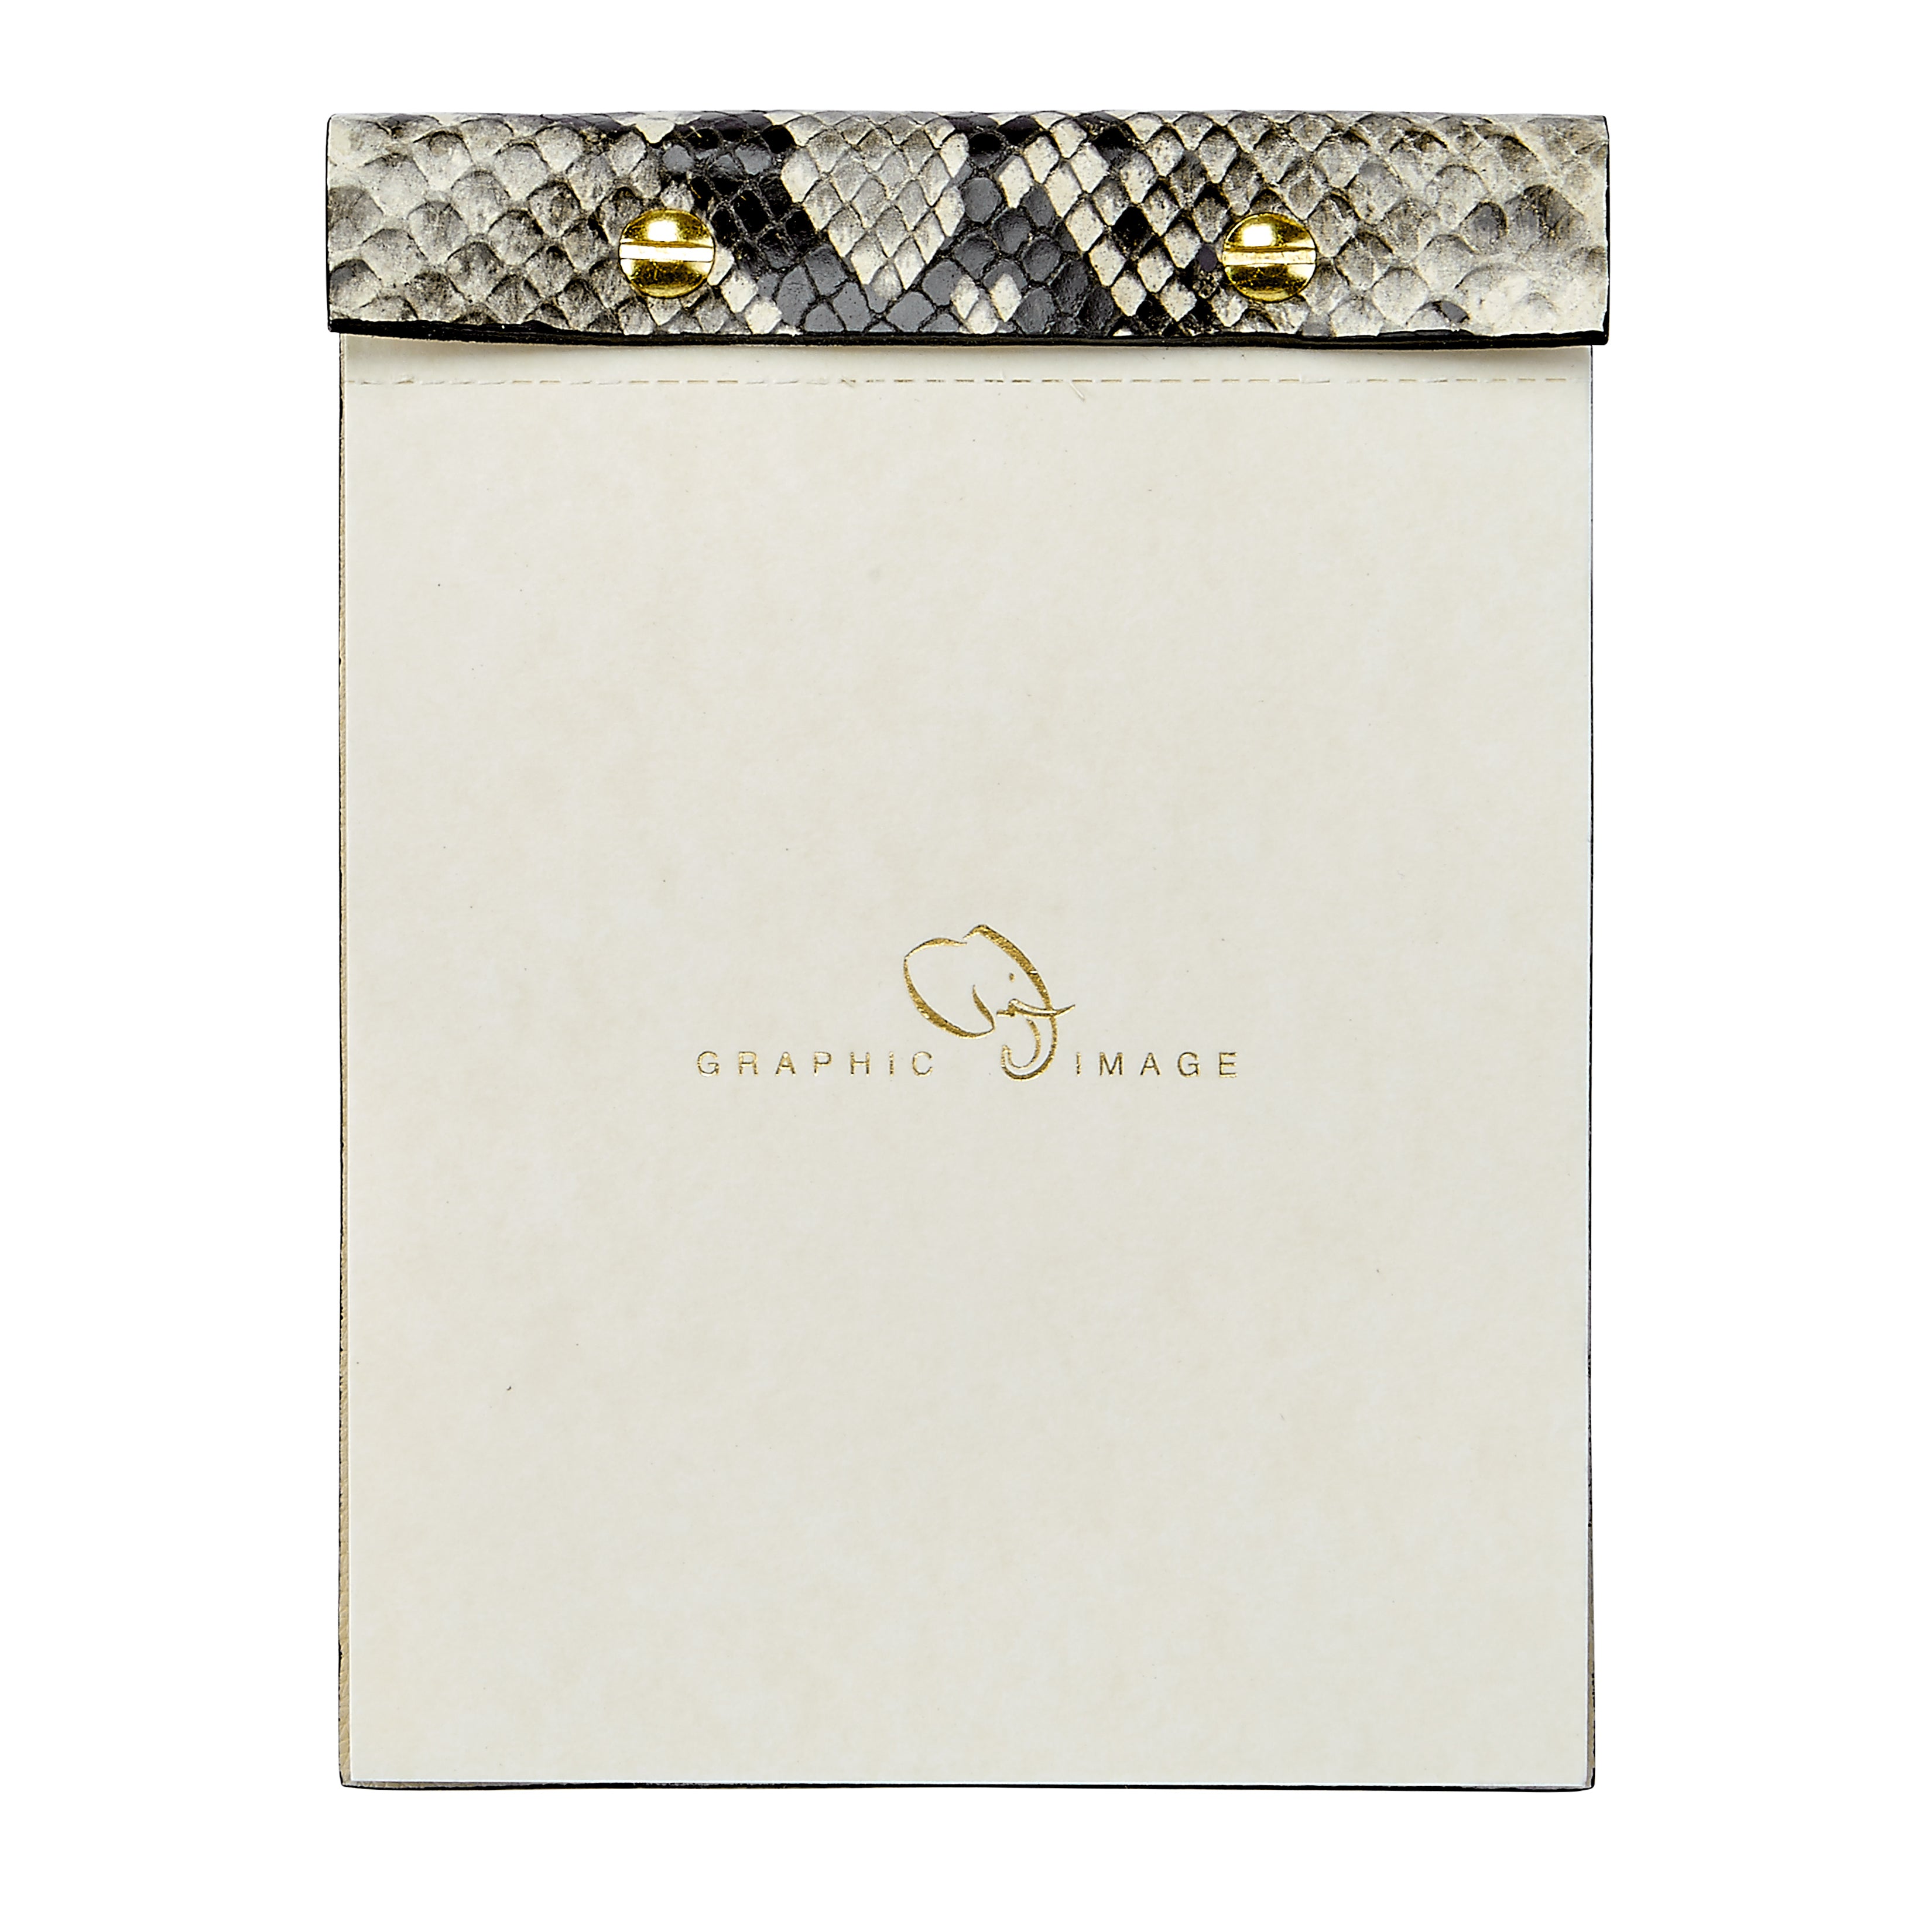 Graphic Image Desk Notepad Natural Italian Printed Python Leather